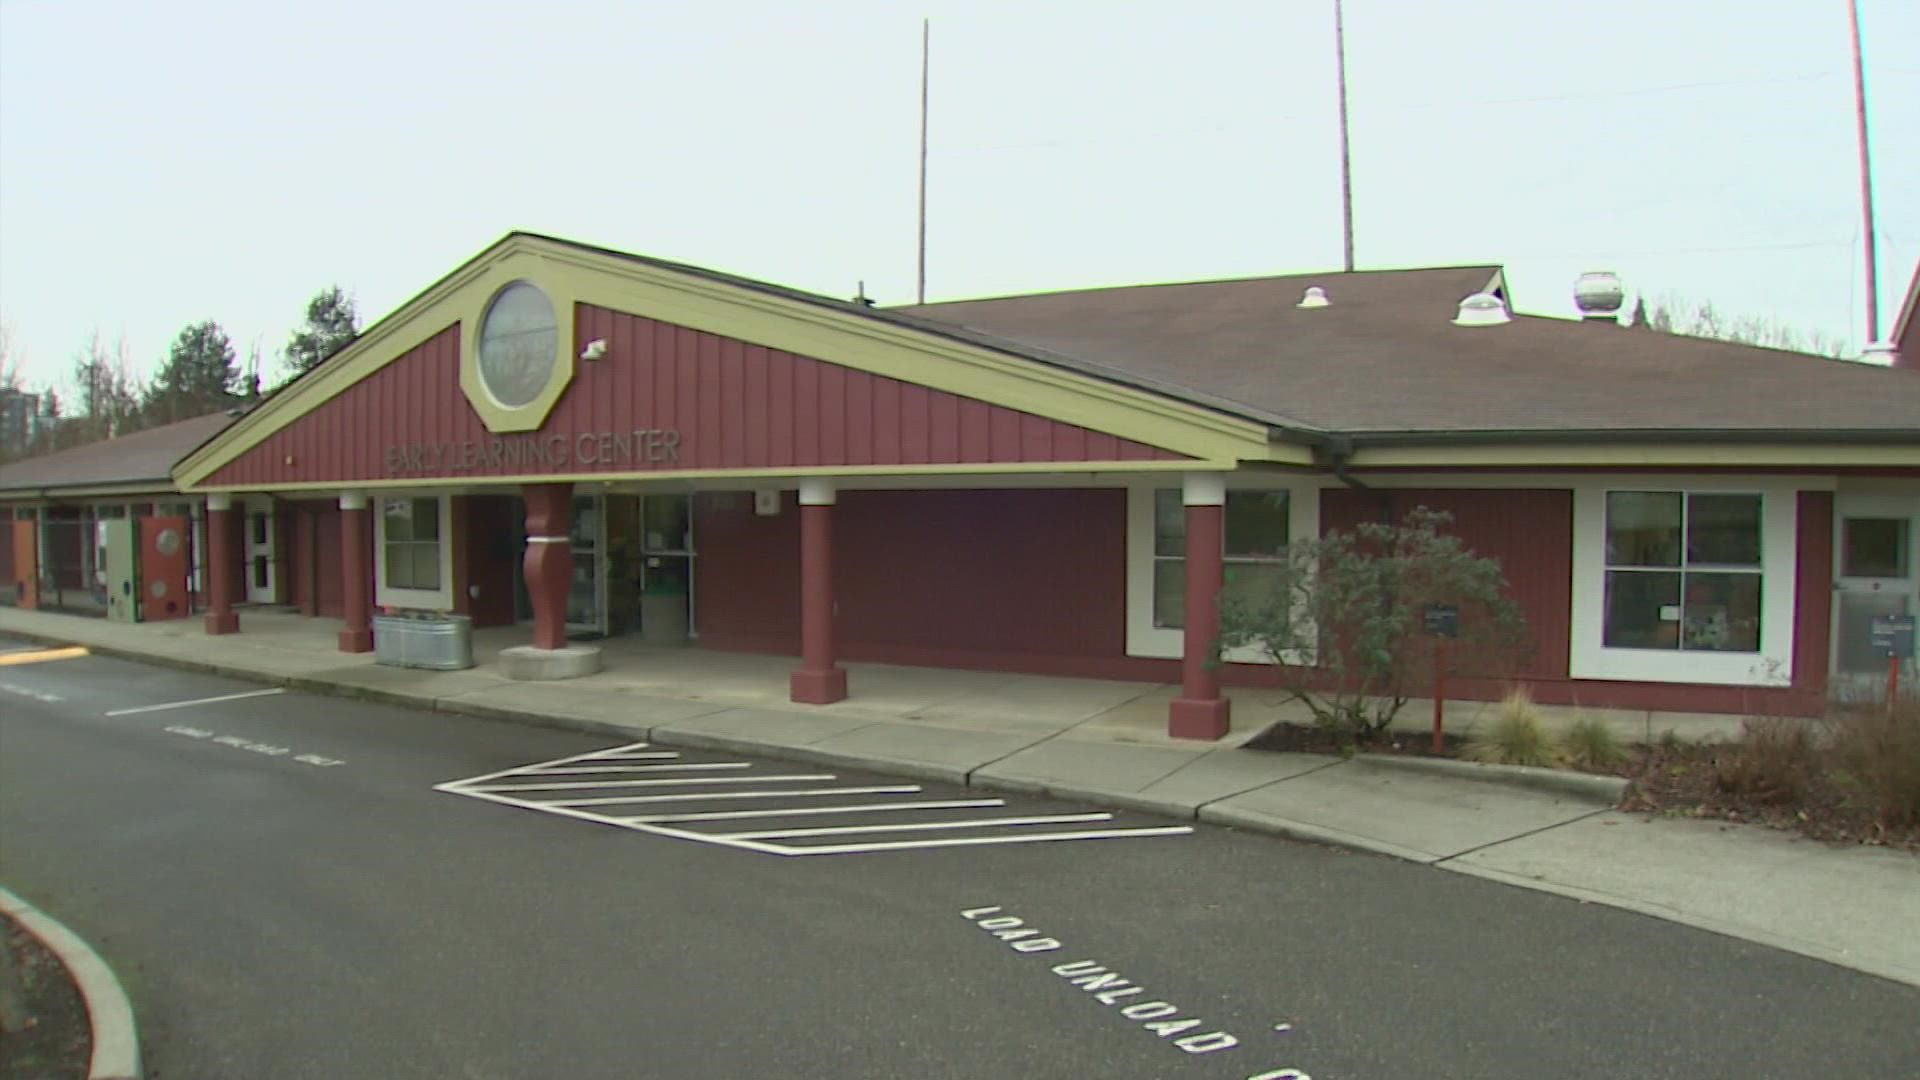 Snohomish County offered $3.5 million over ten years to keep the childcare center open, but the community college has not accepted the offer eight weeks later.